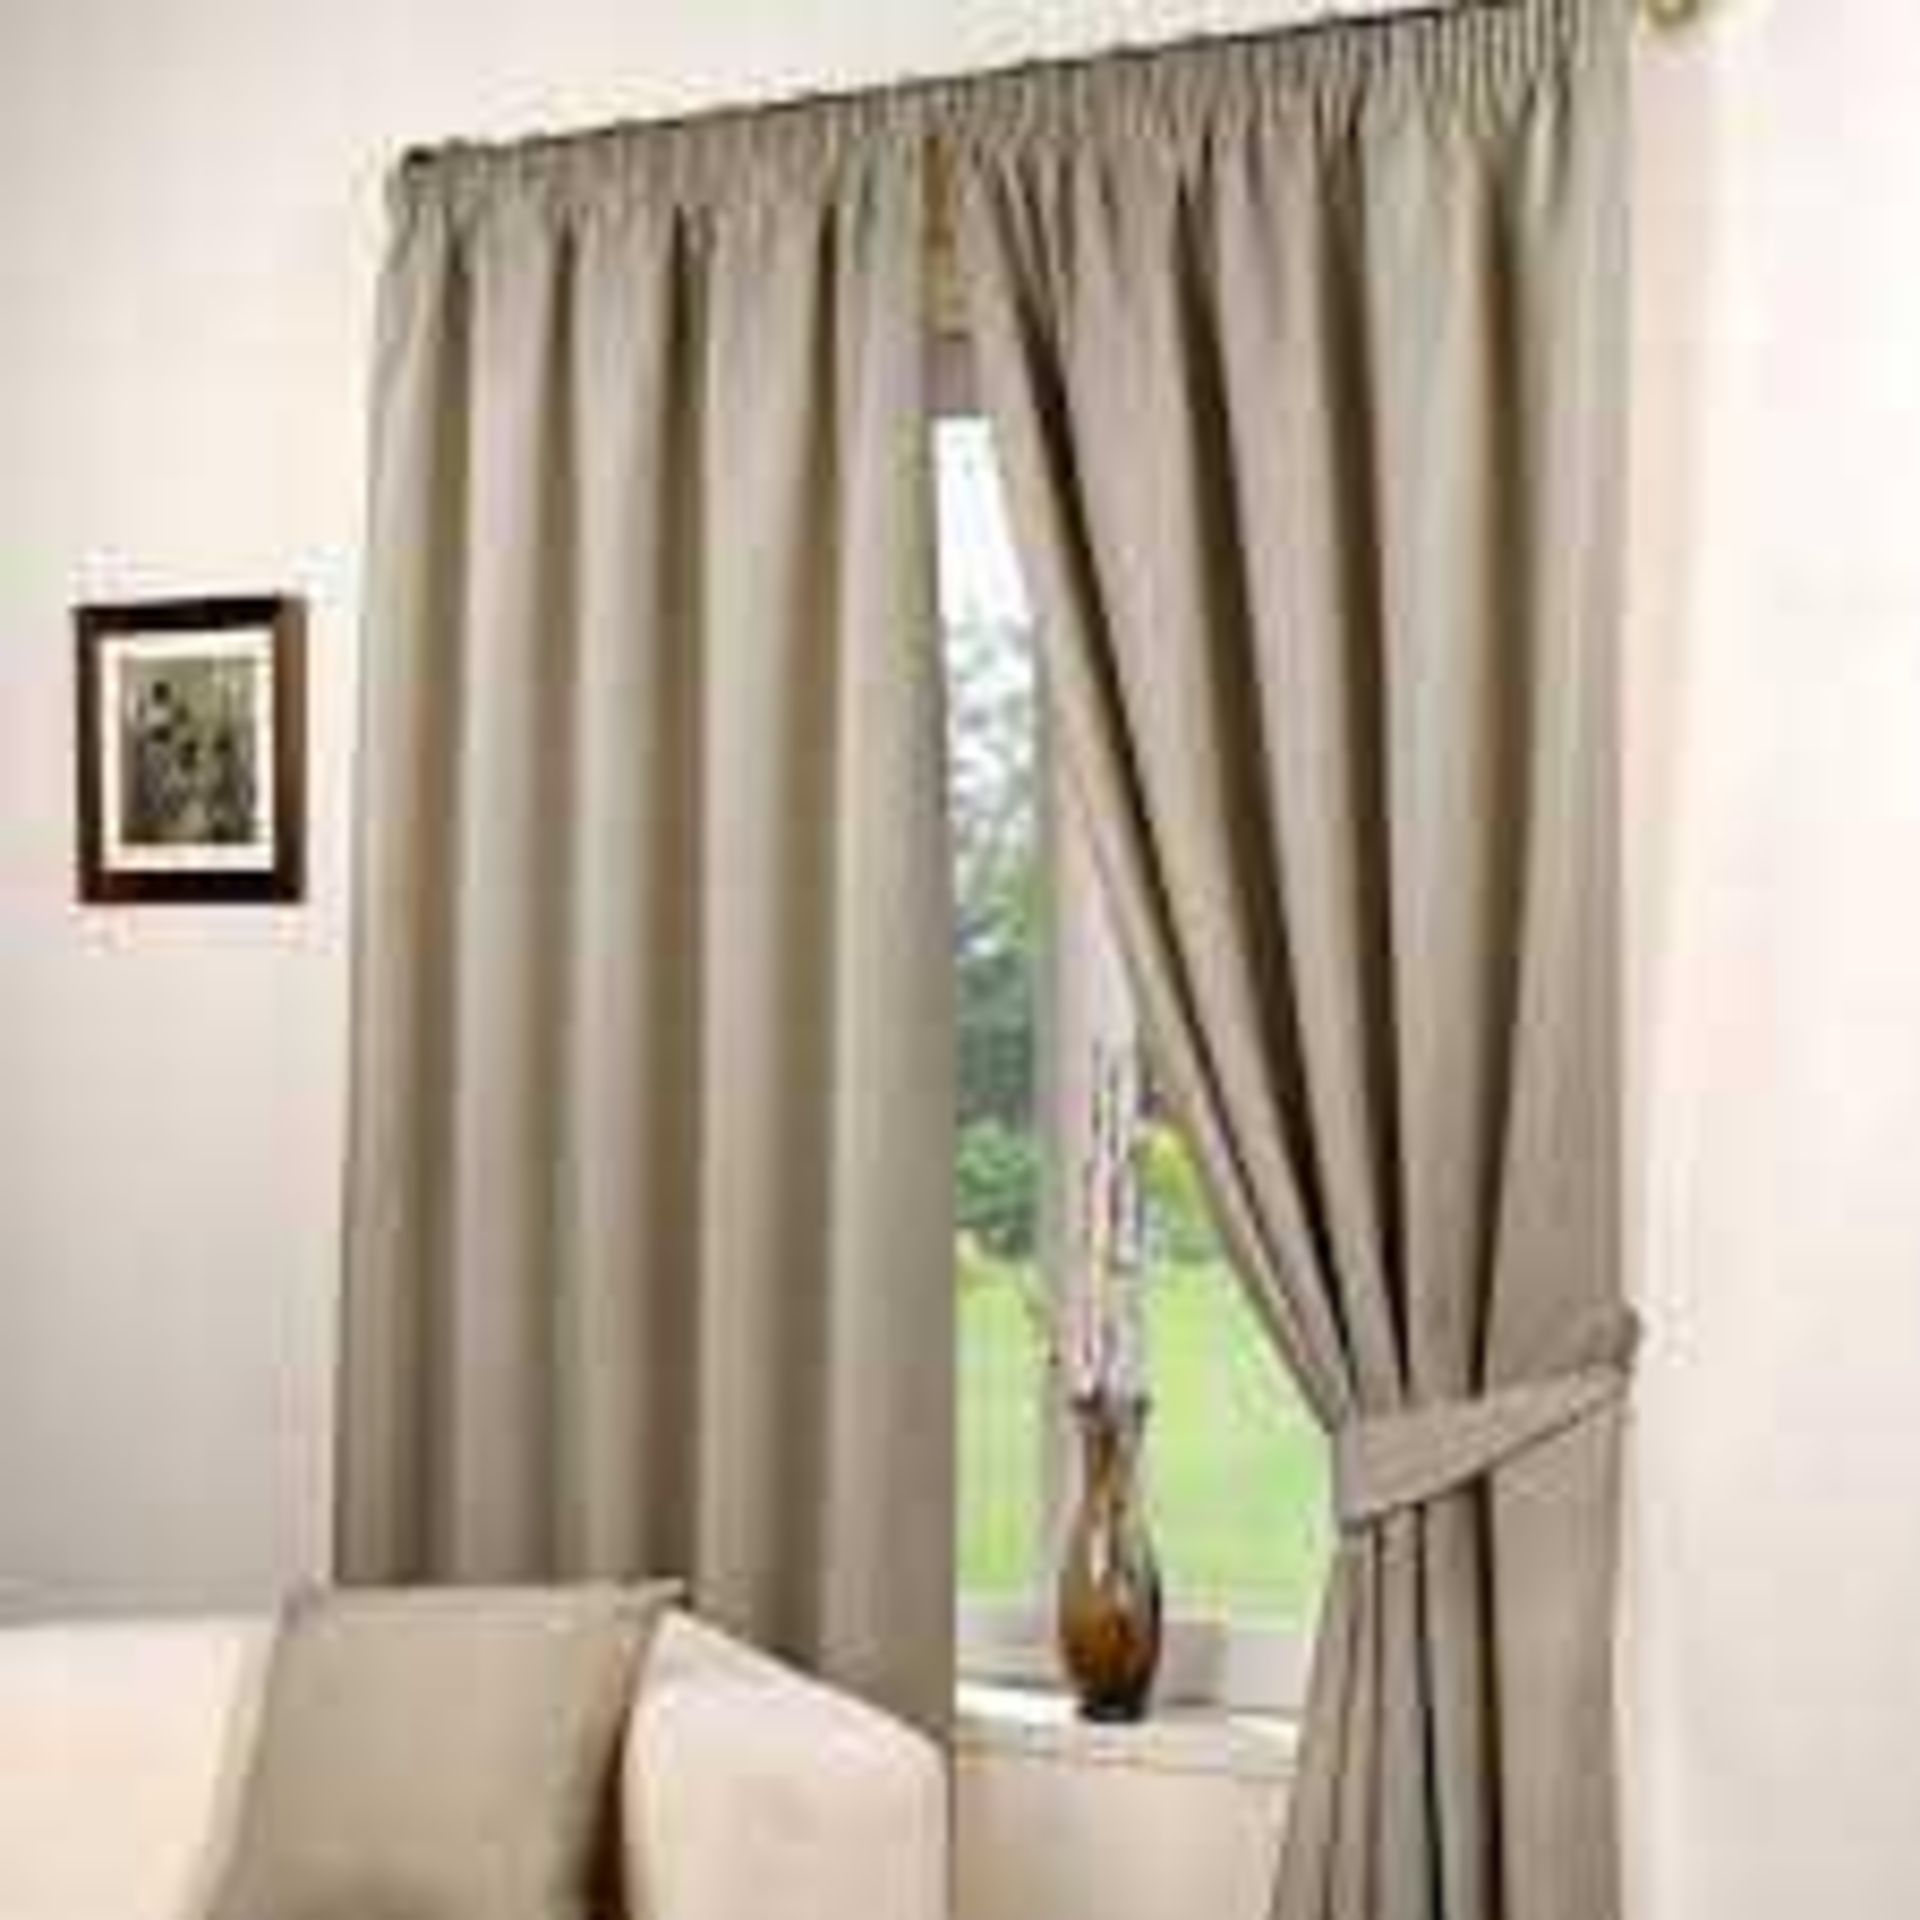 RRP £100 Bagged Hamilton Mcbride Blackout Thermal Curtains - Image 2 of 2